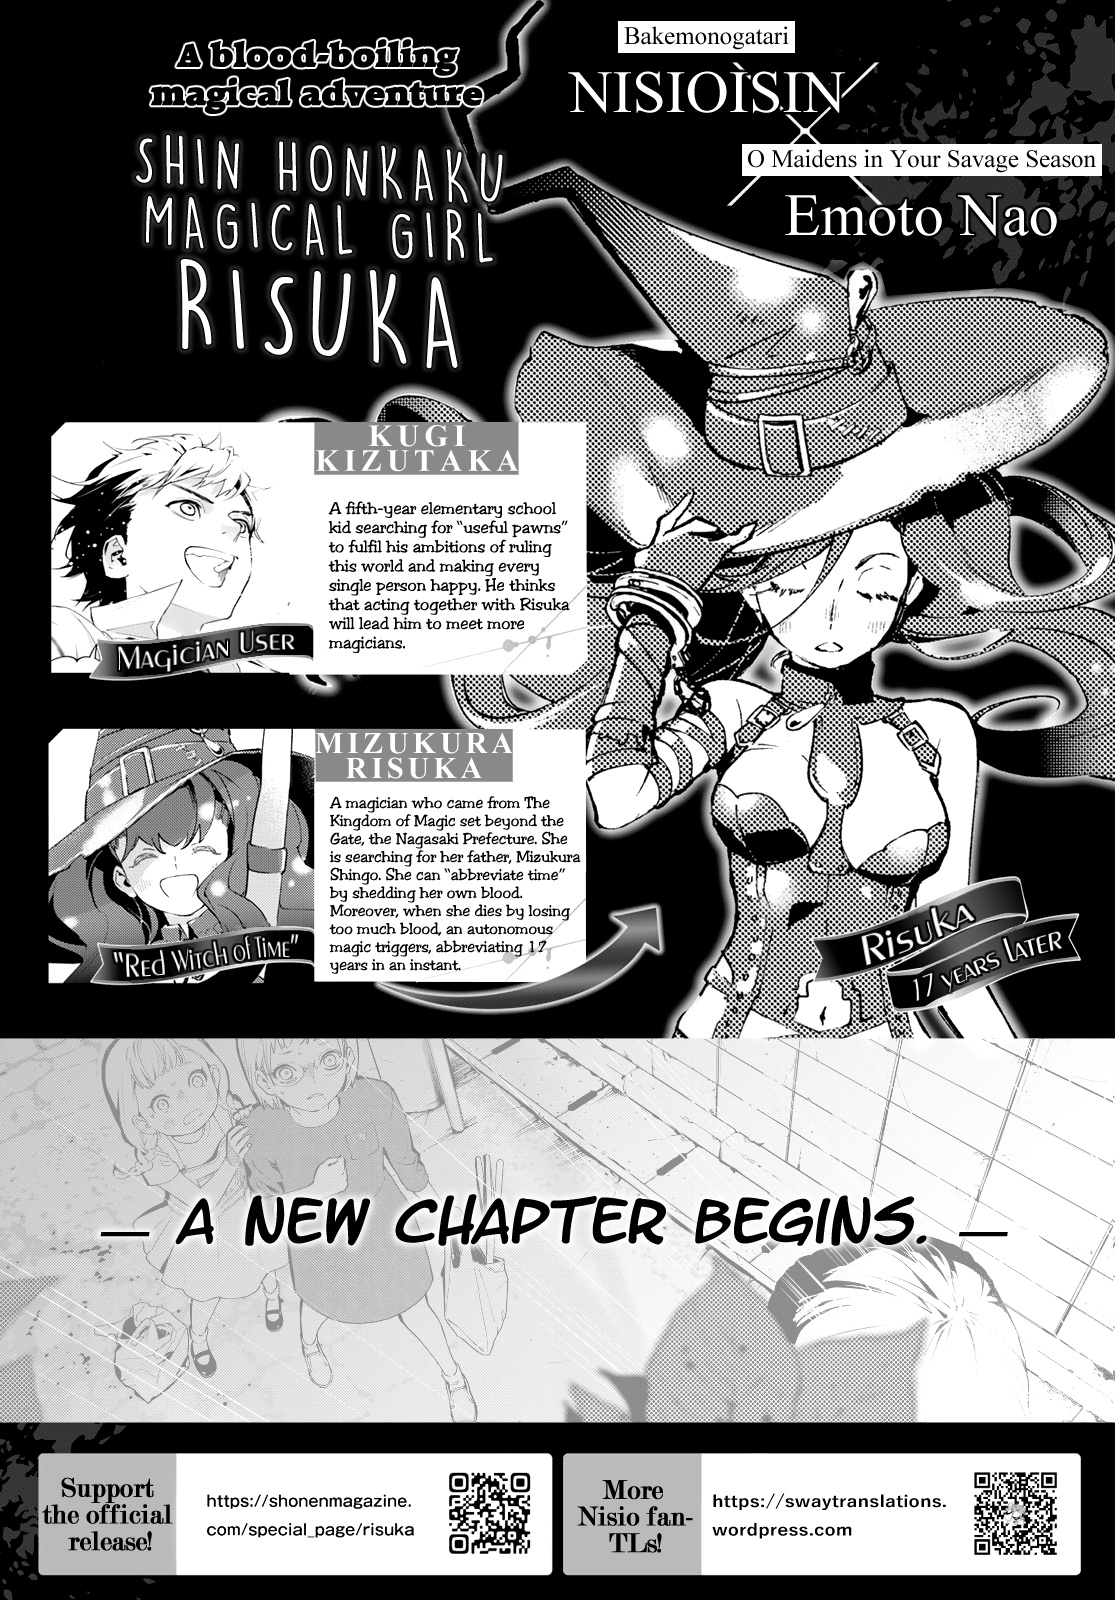 Shin Honkaku Mahou Shoujo Risuka Vol.2 Chapter 4: Let There Be Light Where There Is Shadow. - The Kidnapper Of Young Girls - Picture 1